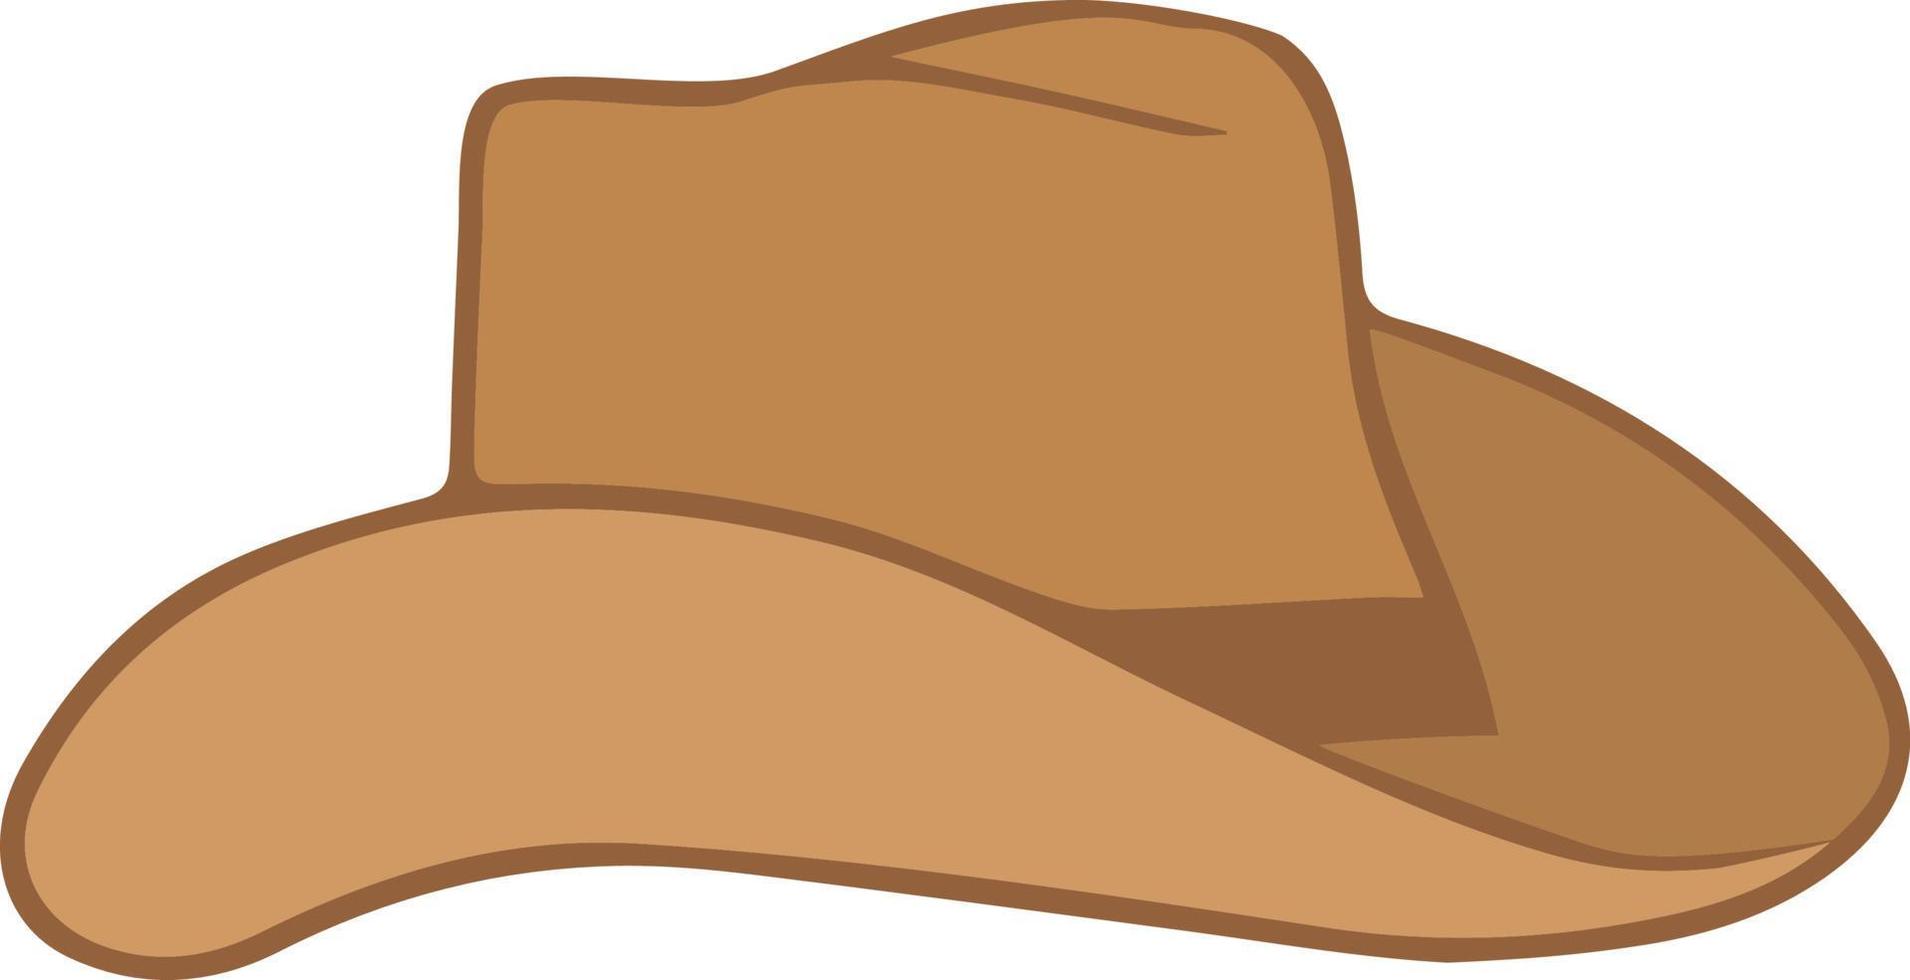 Cowboy hat icon is brown. Linear vector icon in flat style.